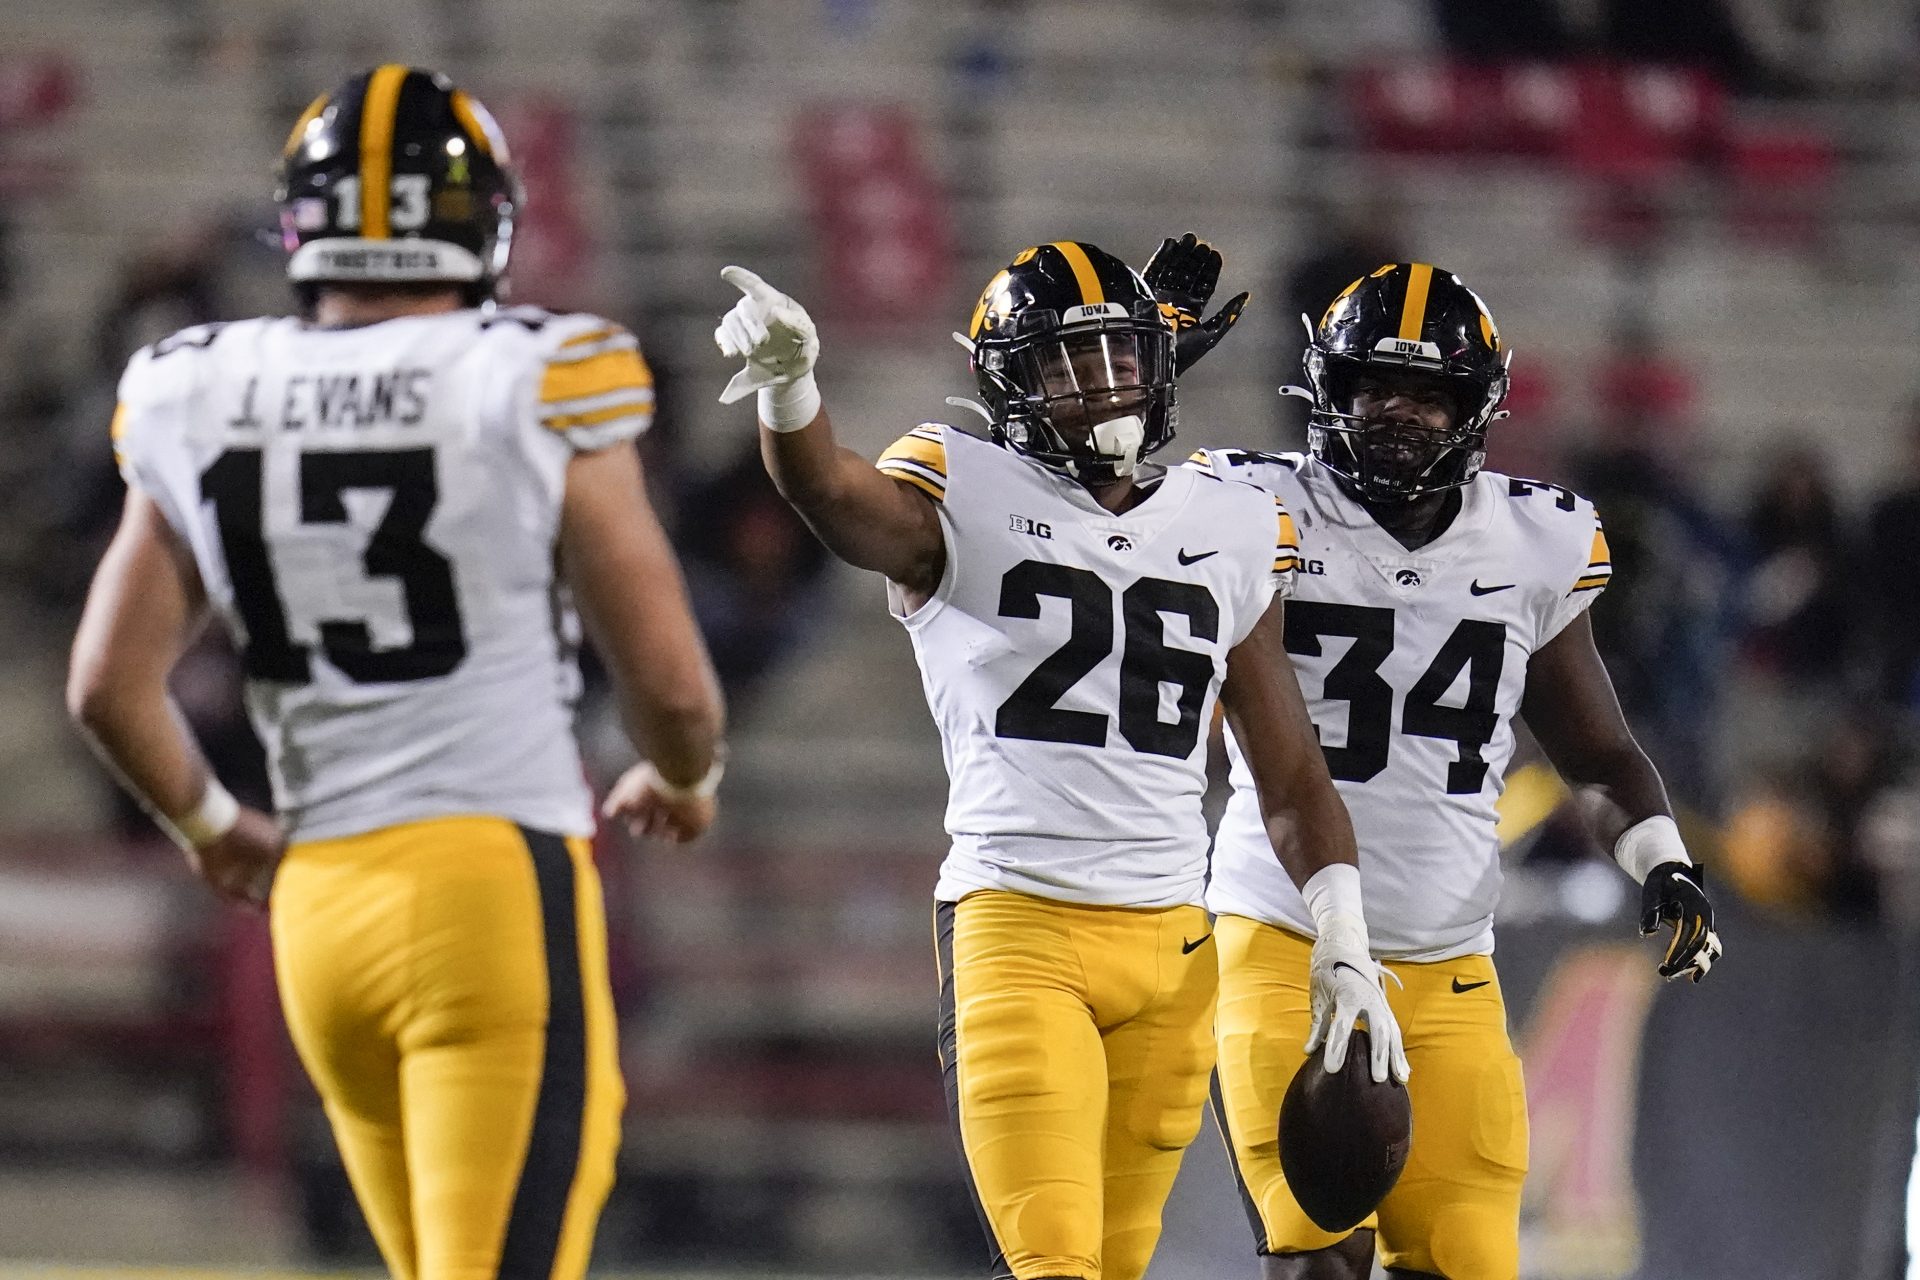 Iowa defensive back Kaevon Merriweather (26) reacts after making an interception on a pass from Maryland quarterback Taulia Tagovailoa, not visible, during the second half of an NCAA college football game in College Park, Md., in this Friday, Oct. 1, 2021.